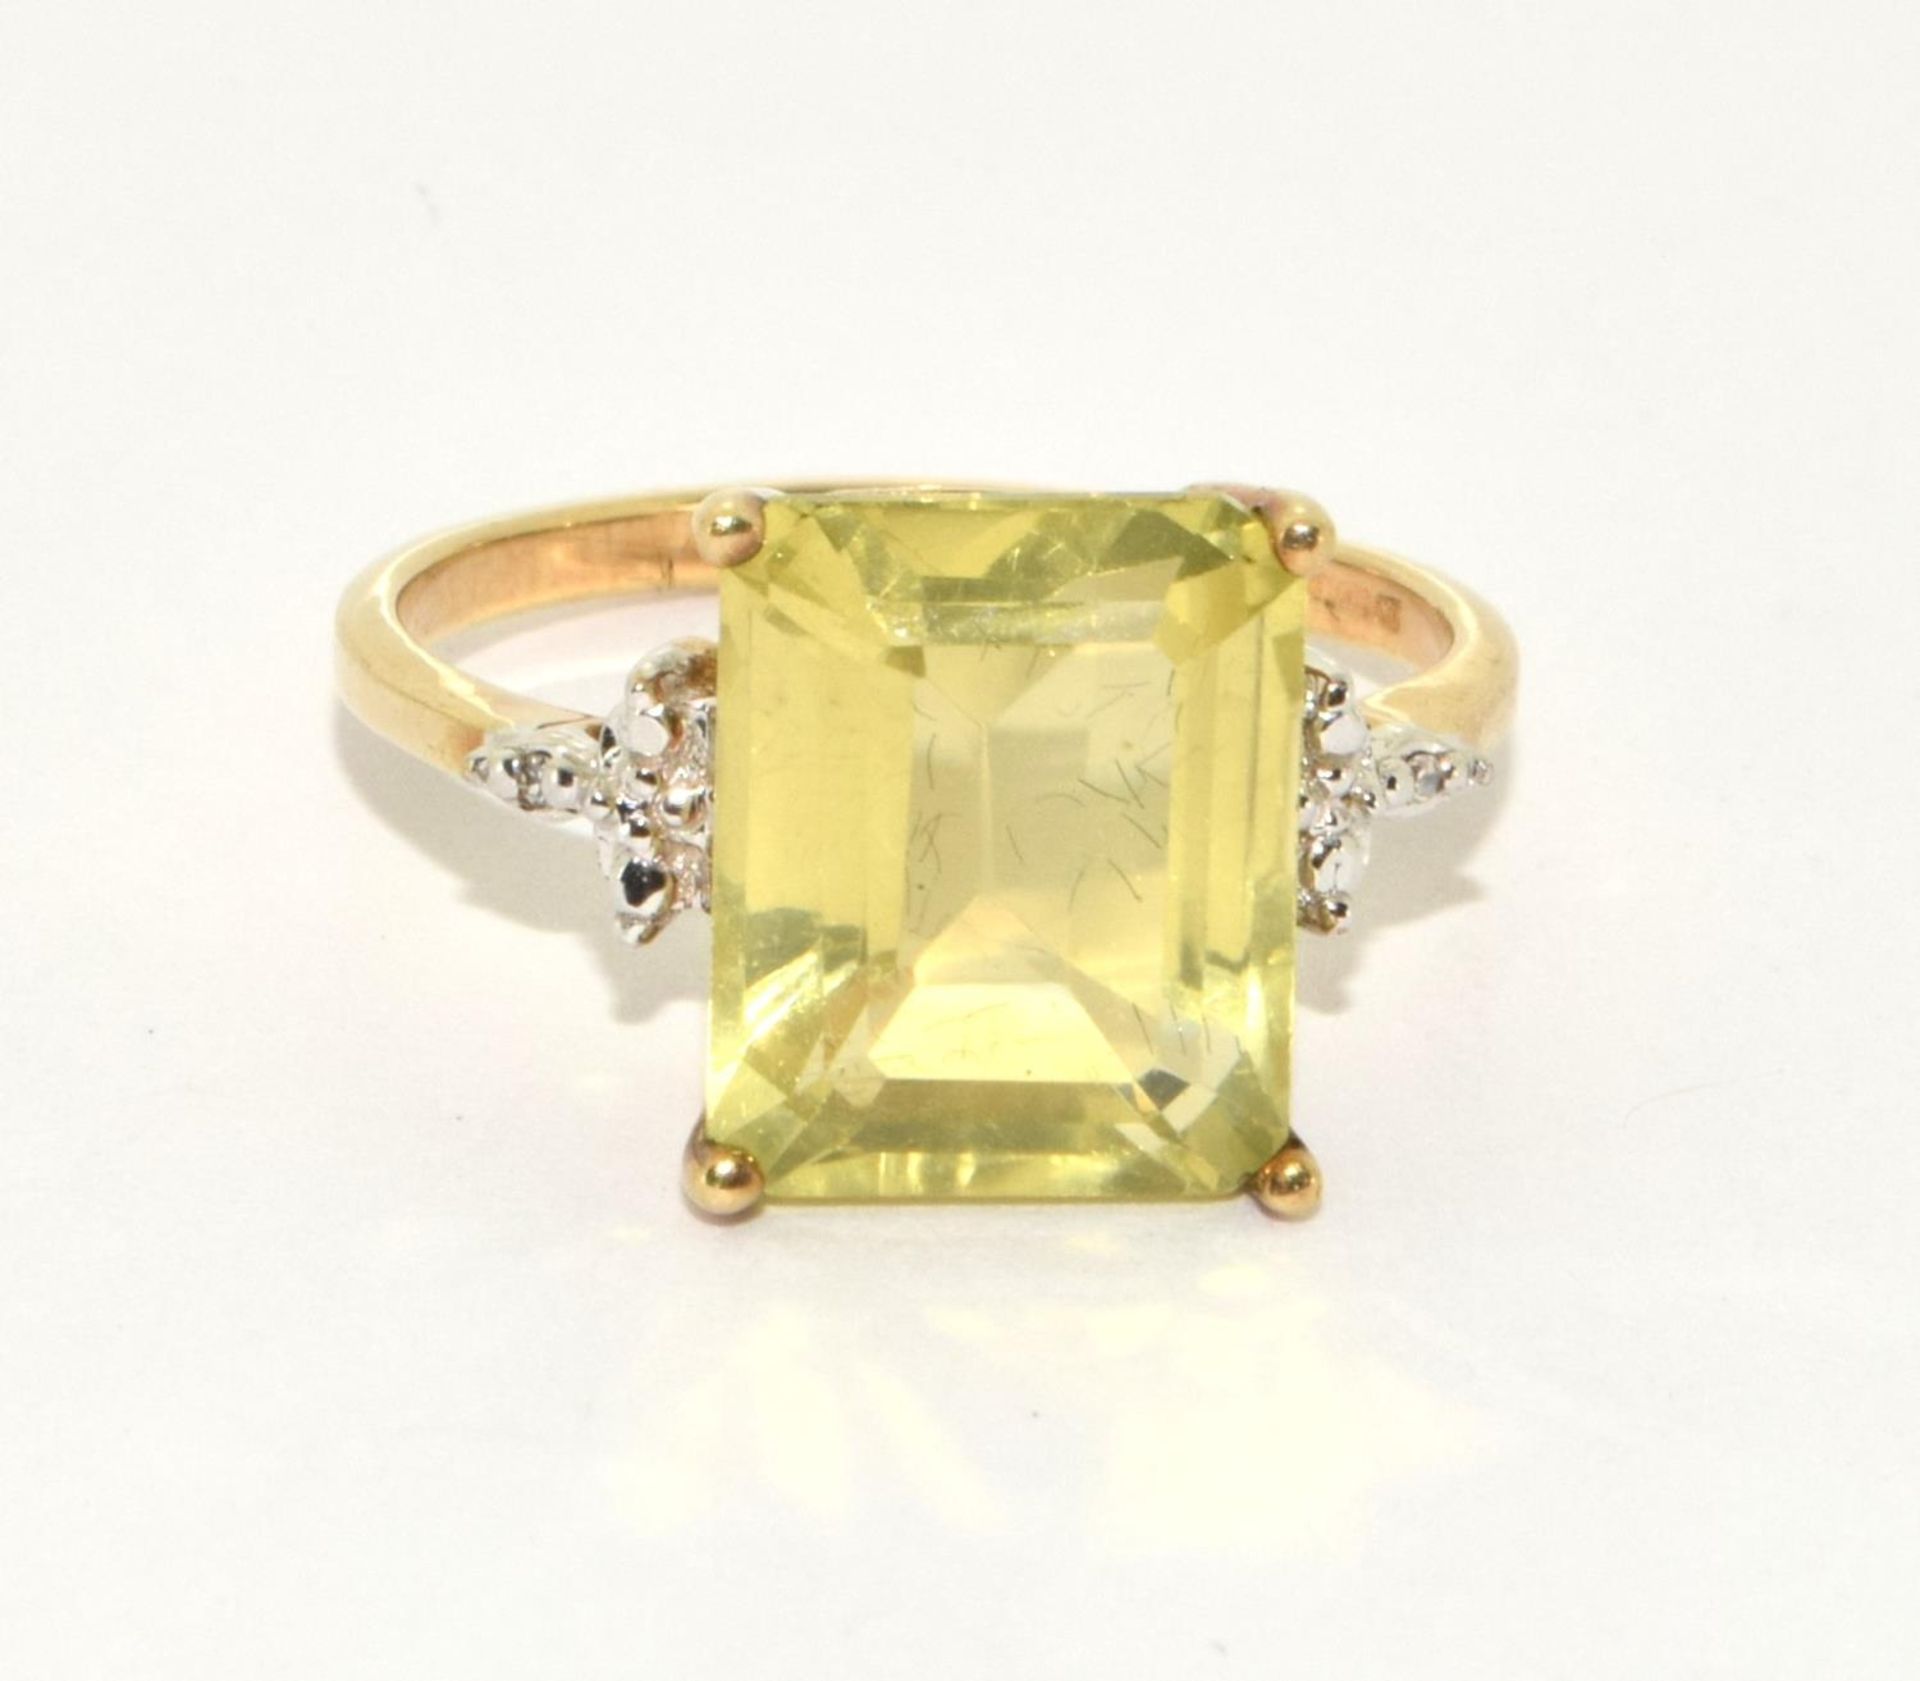 9ct gold ladies Diamond and Peridot ring with a large square center stone size N - Image 5 of 5